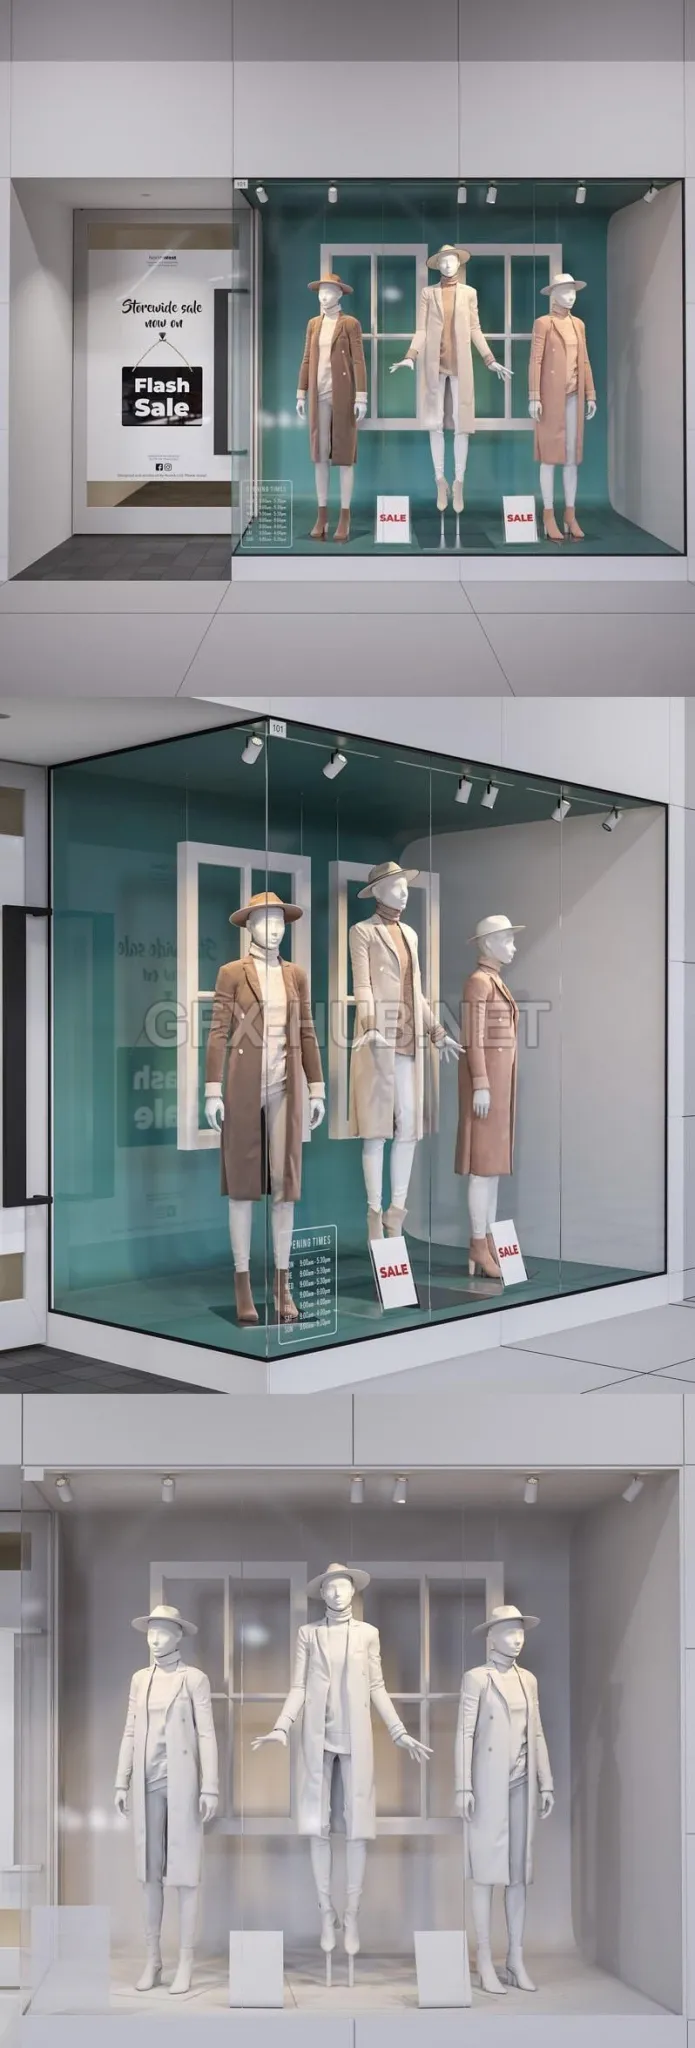 Shop front with female mannequins – 225037